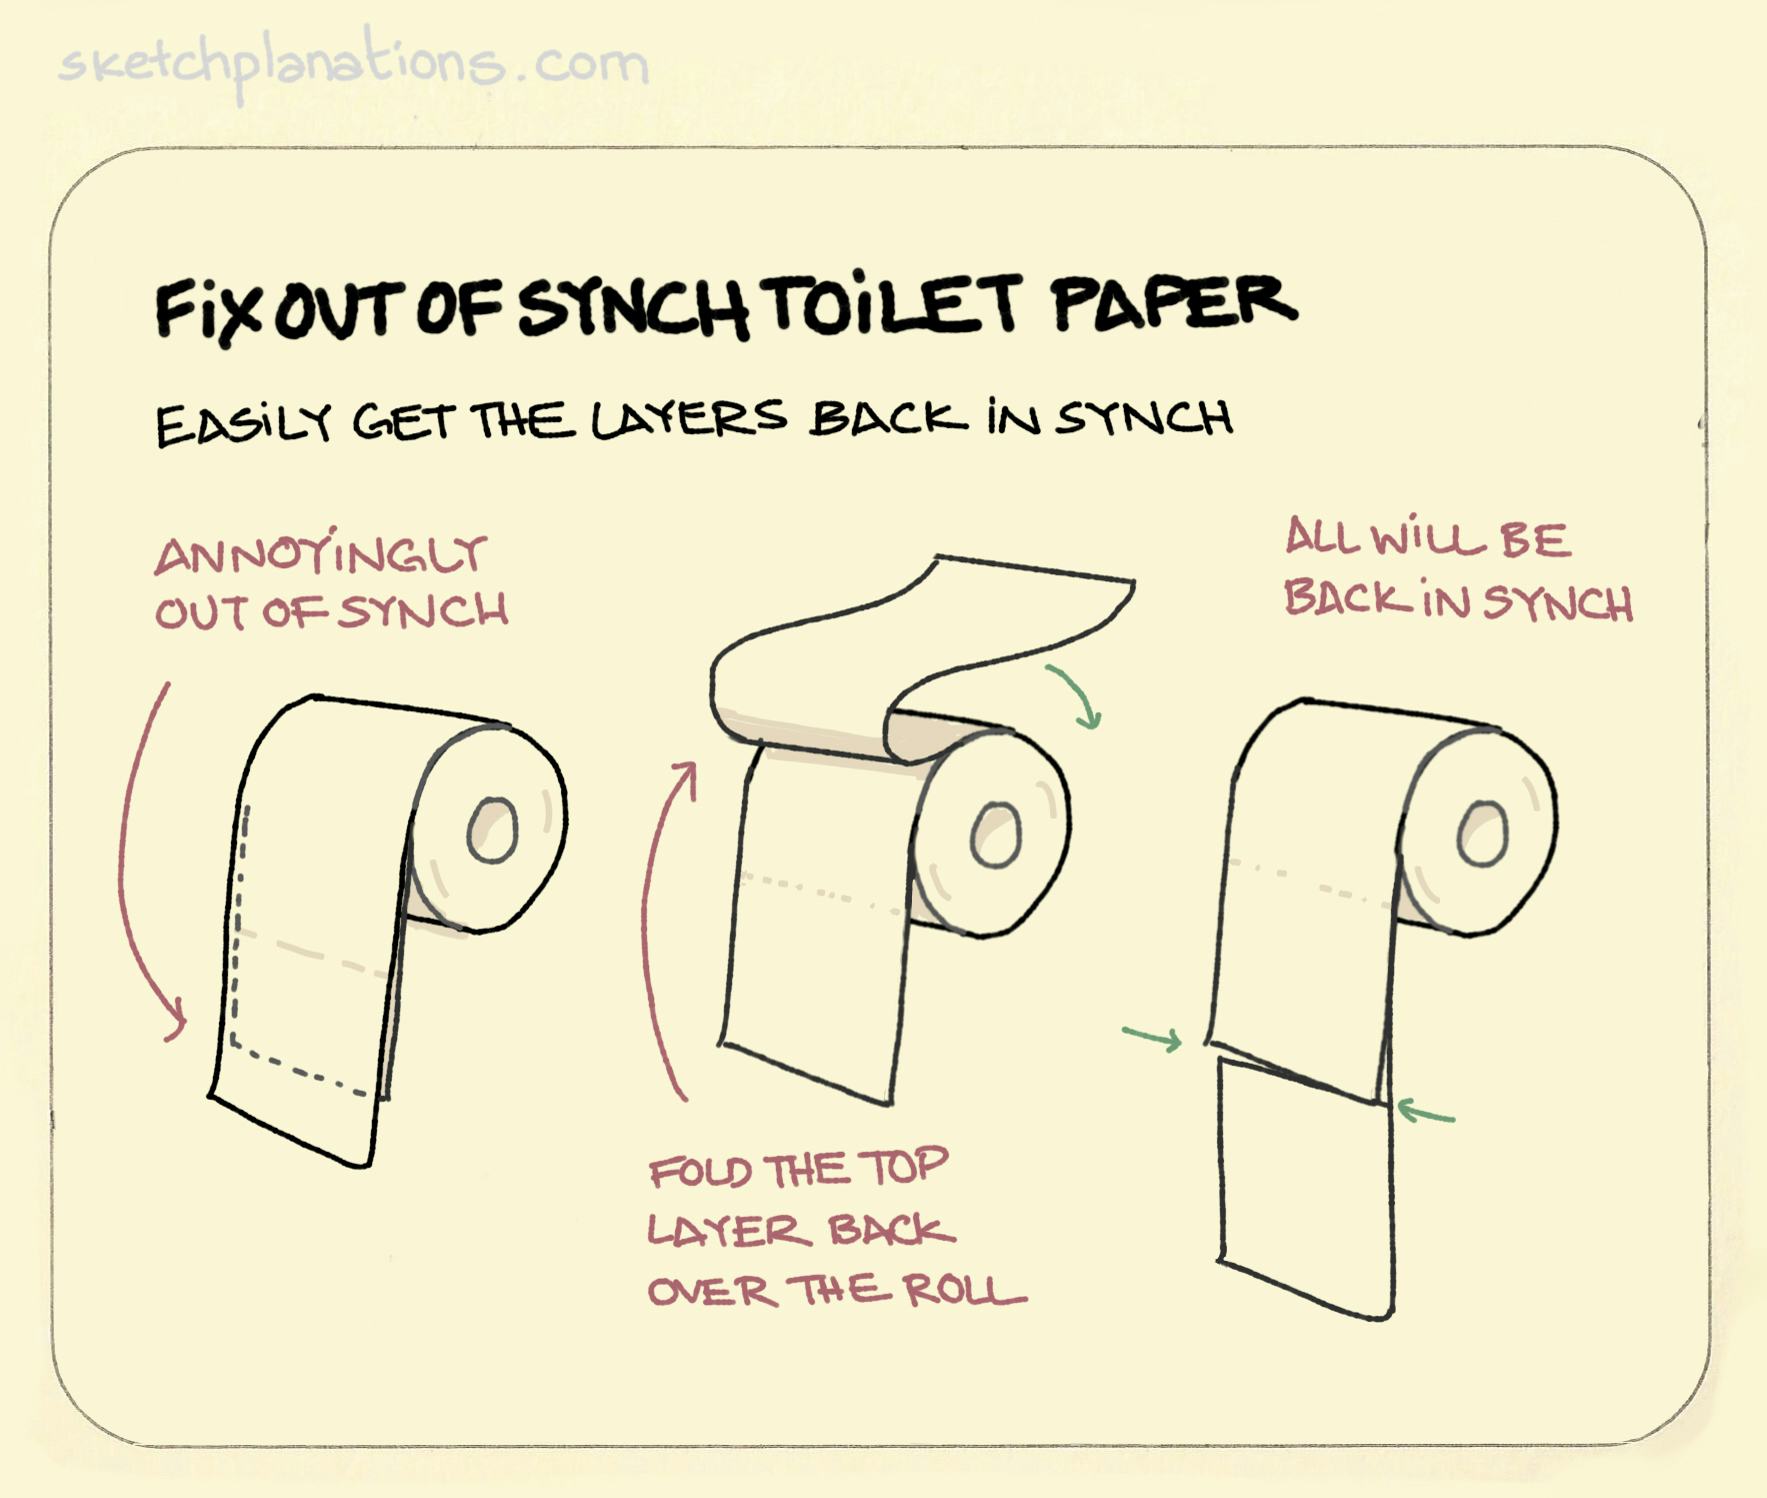 Fix out of synch toilet paper. - Sketchplanations